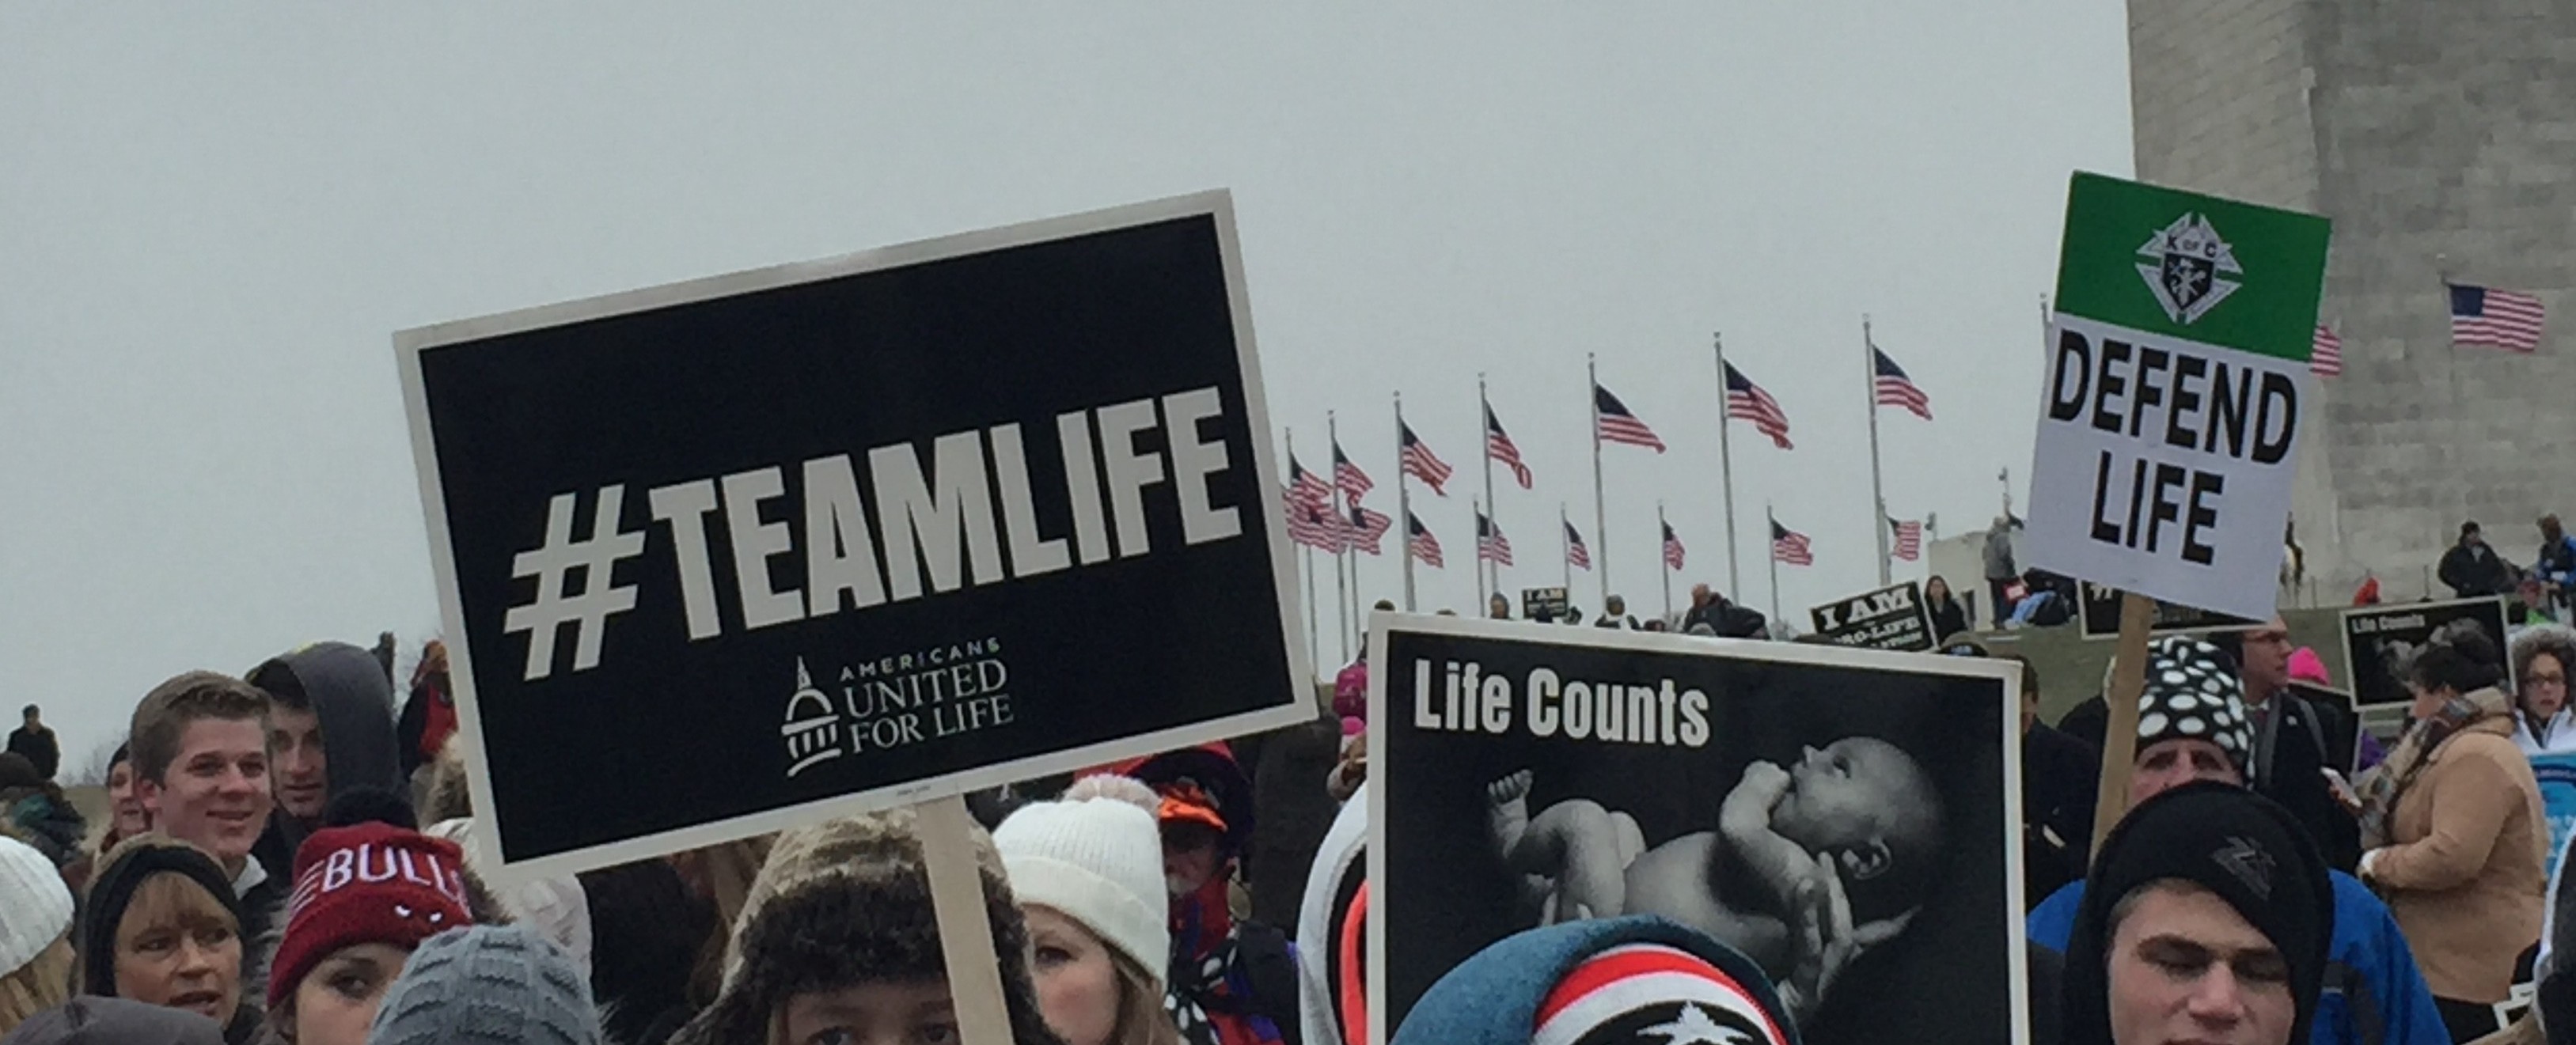 Protesters hold #TeamLife and other prochoice signs at March for Life in Washington, D.C.